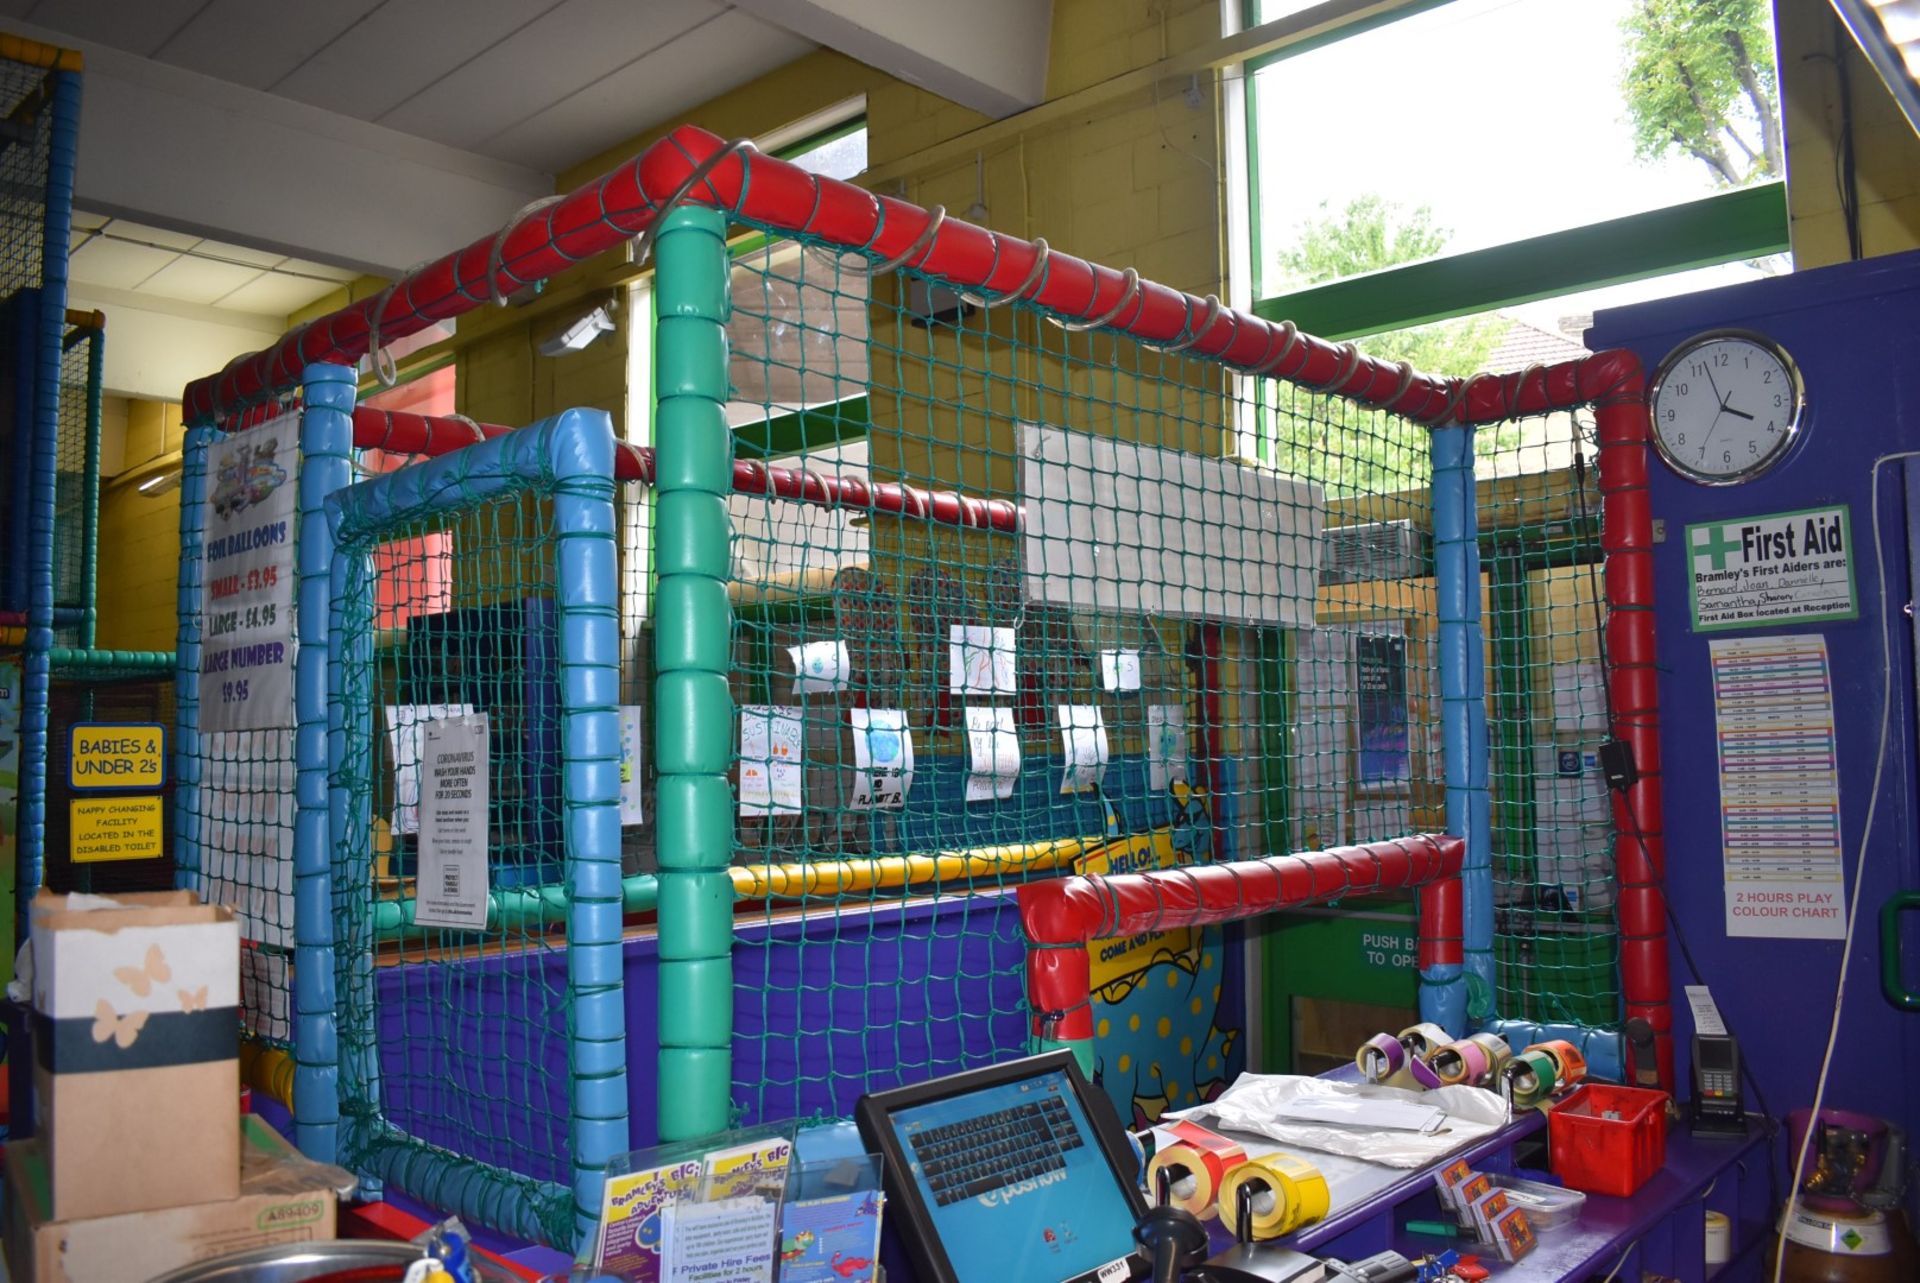 Bramleys Big Adventure Playground - Giant Action-Packed Playcentre With Slides, Zip Line Swings, - Image 90 of 128